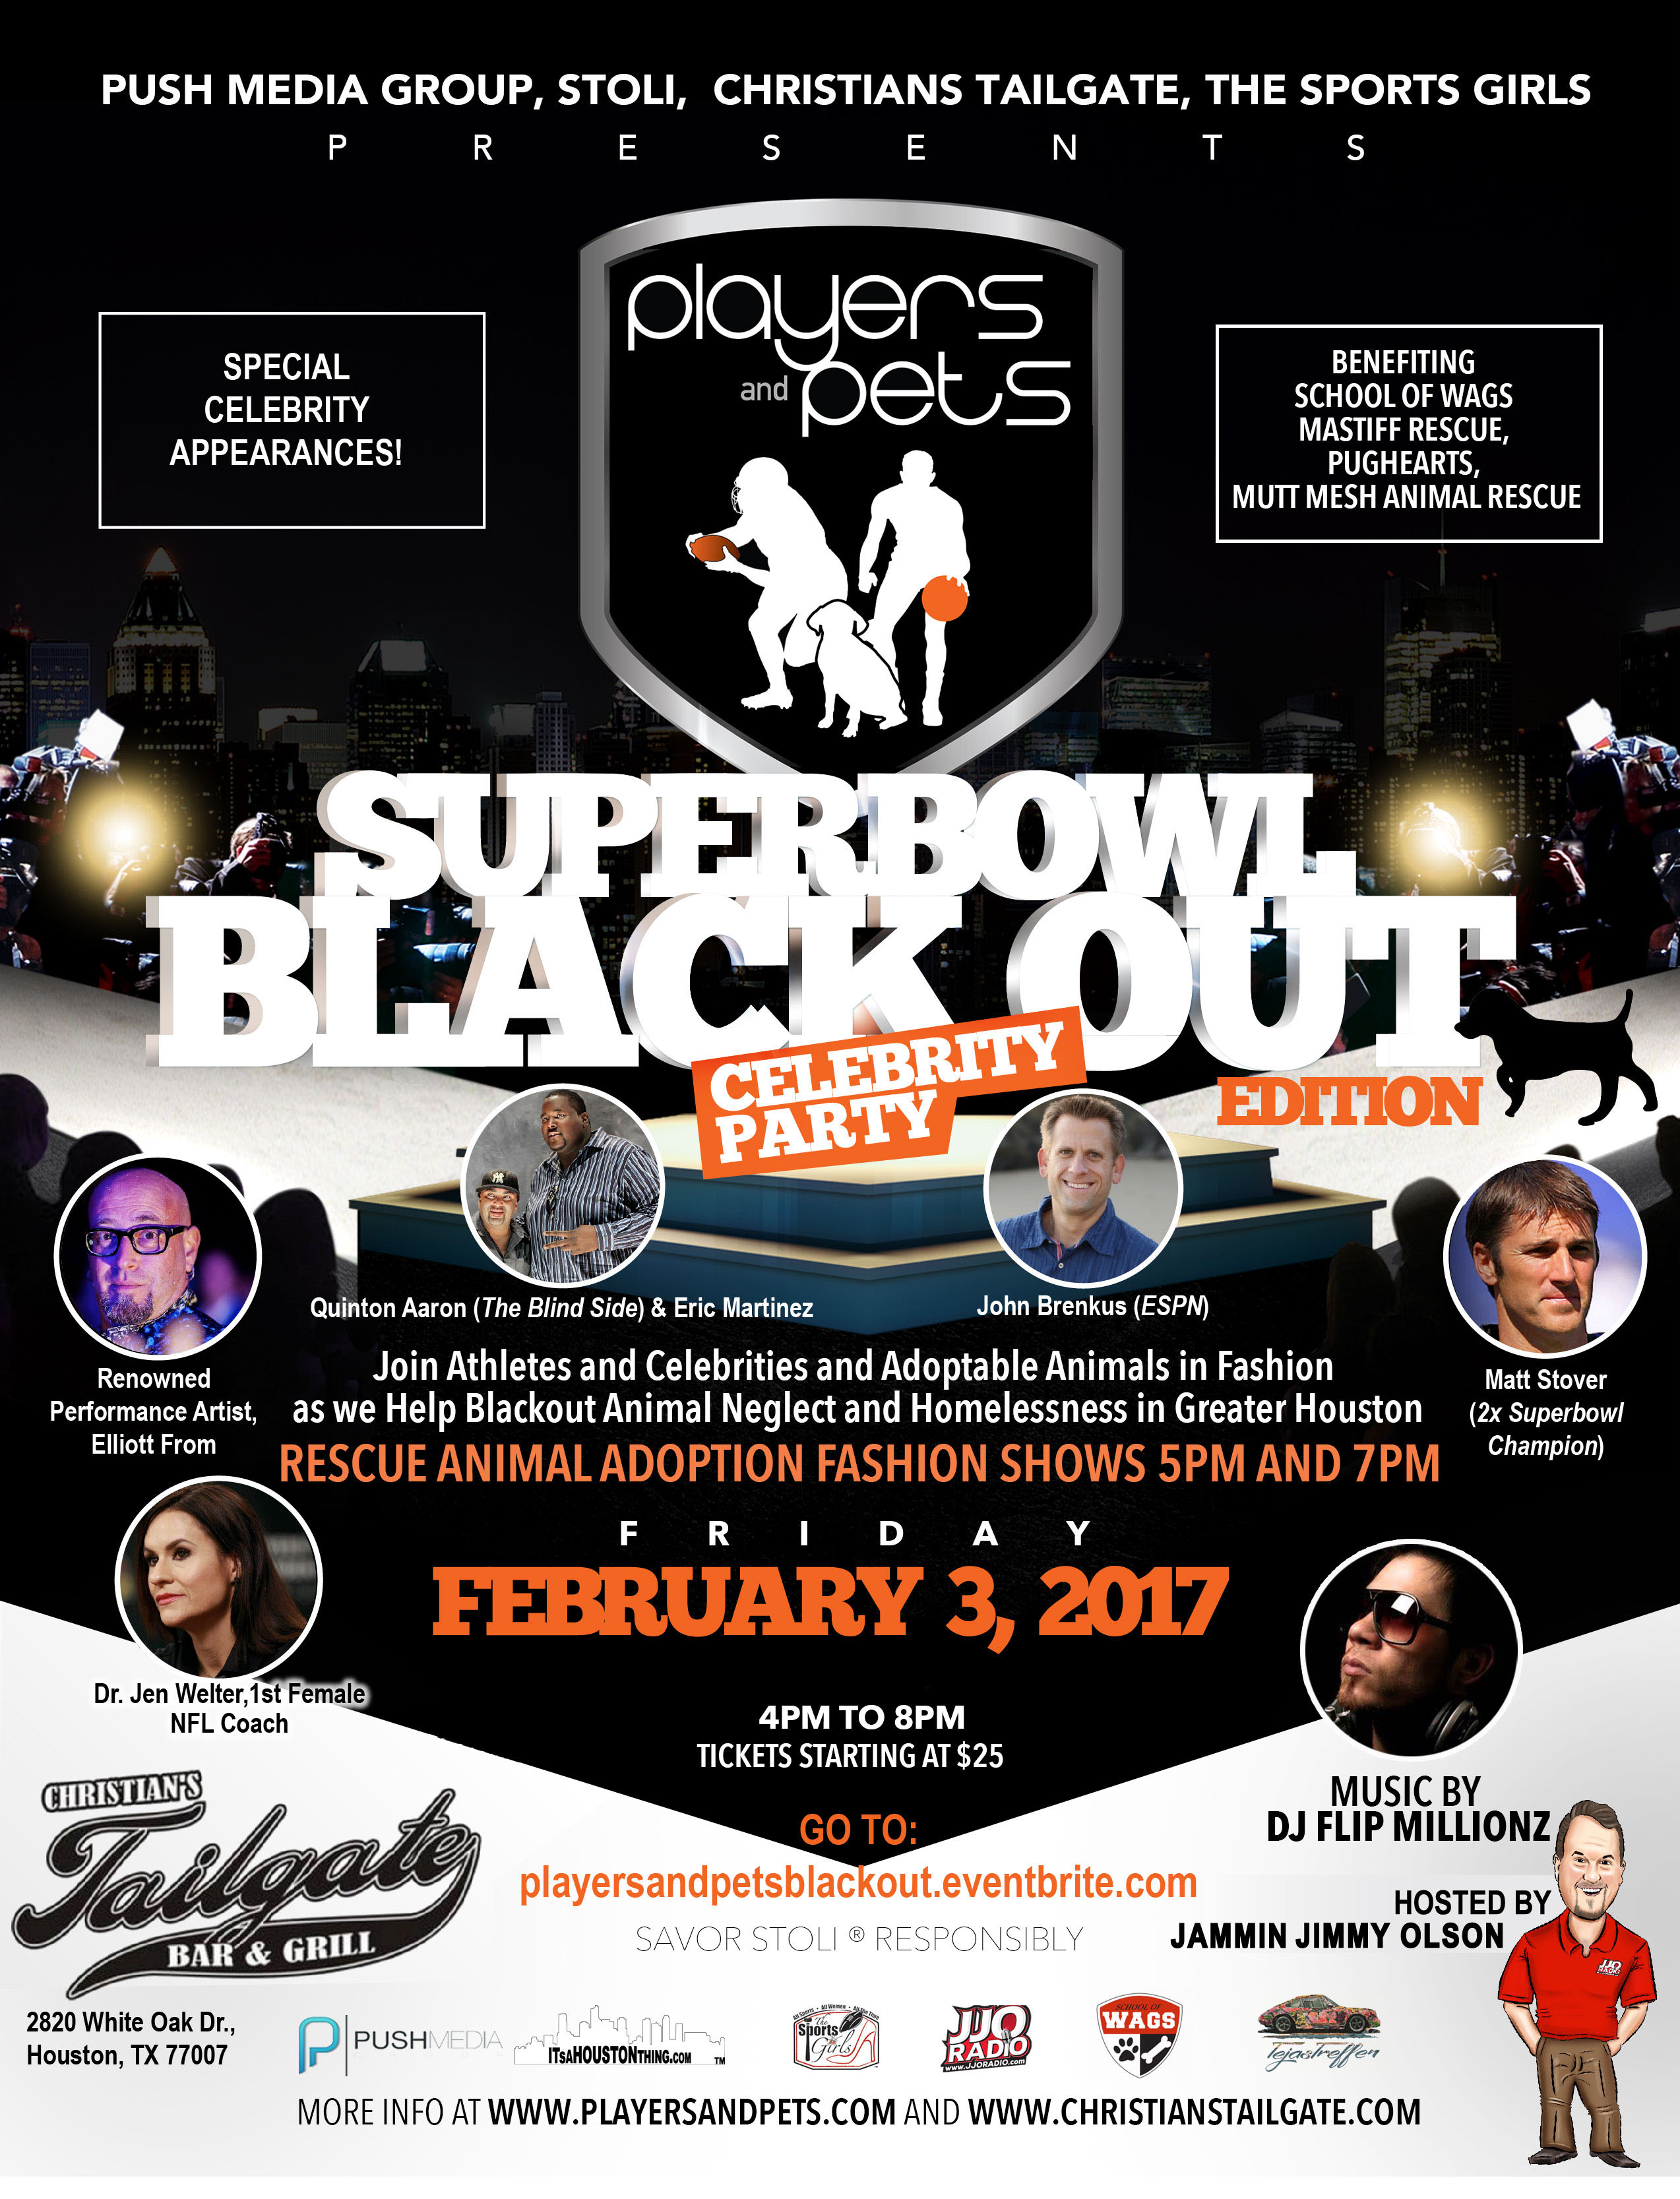 Players and Pets Super Bowl Edition Blackout Celebrity Party Houston 2017